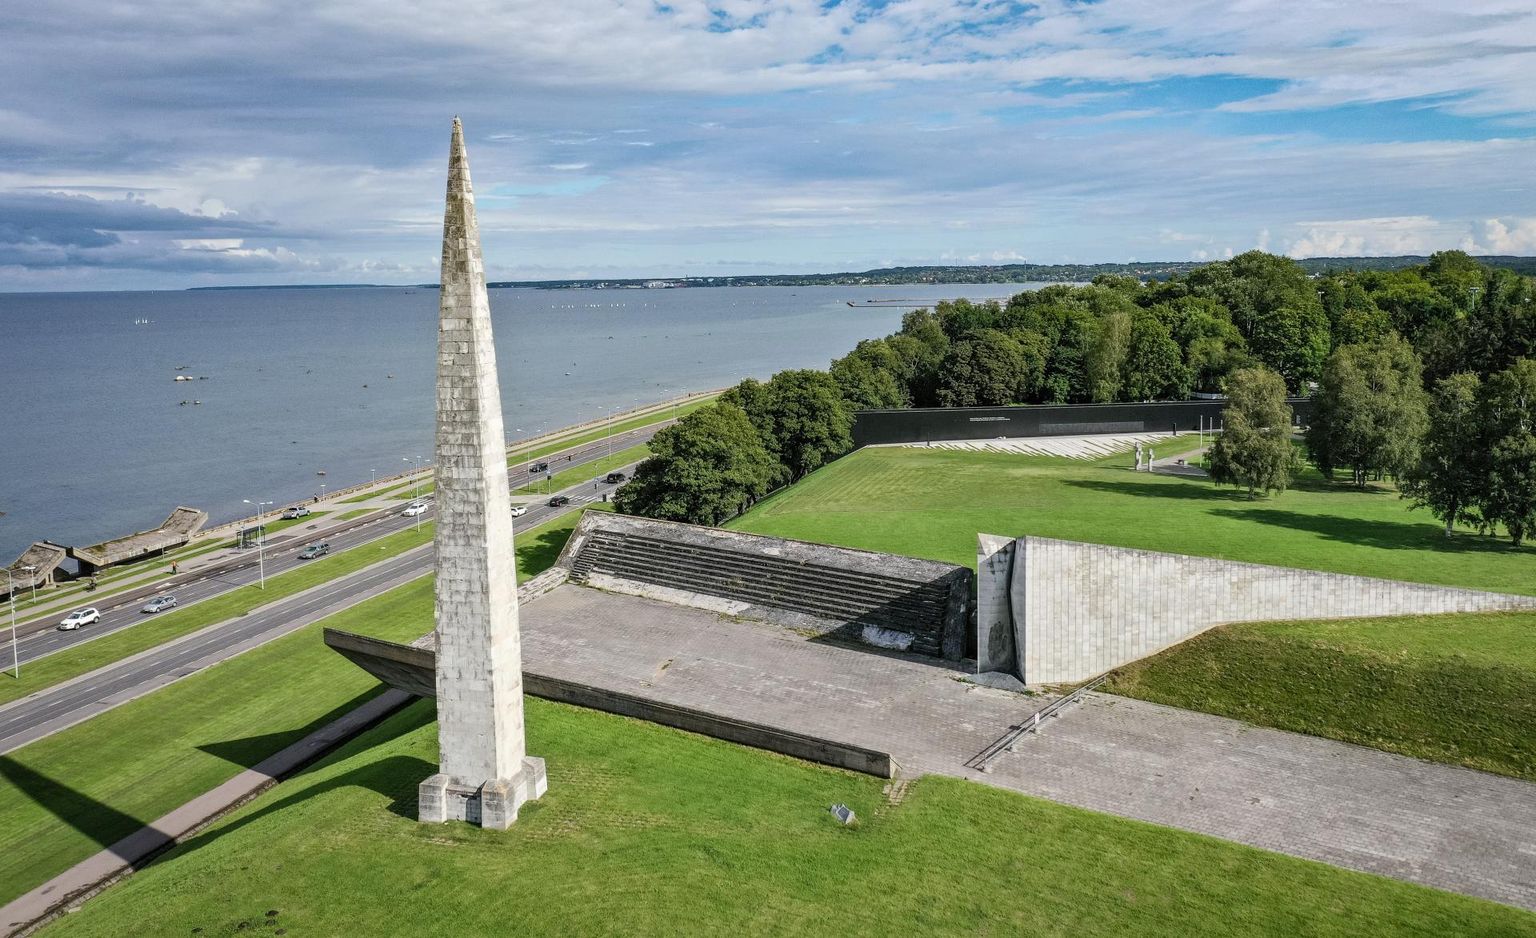 In order to evaluate the Maarjamäe memorial complex as a whole, if possible, a public discussion should take place, during which alternative solutions for the future of the complex could also be proposed.